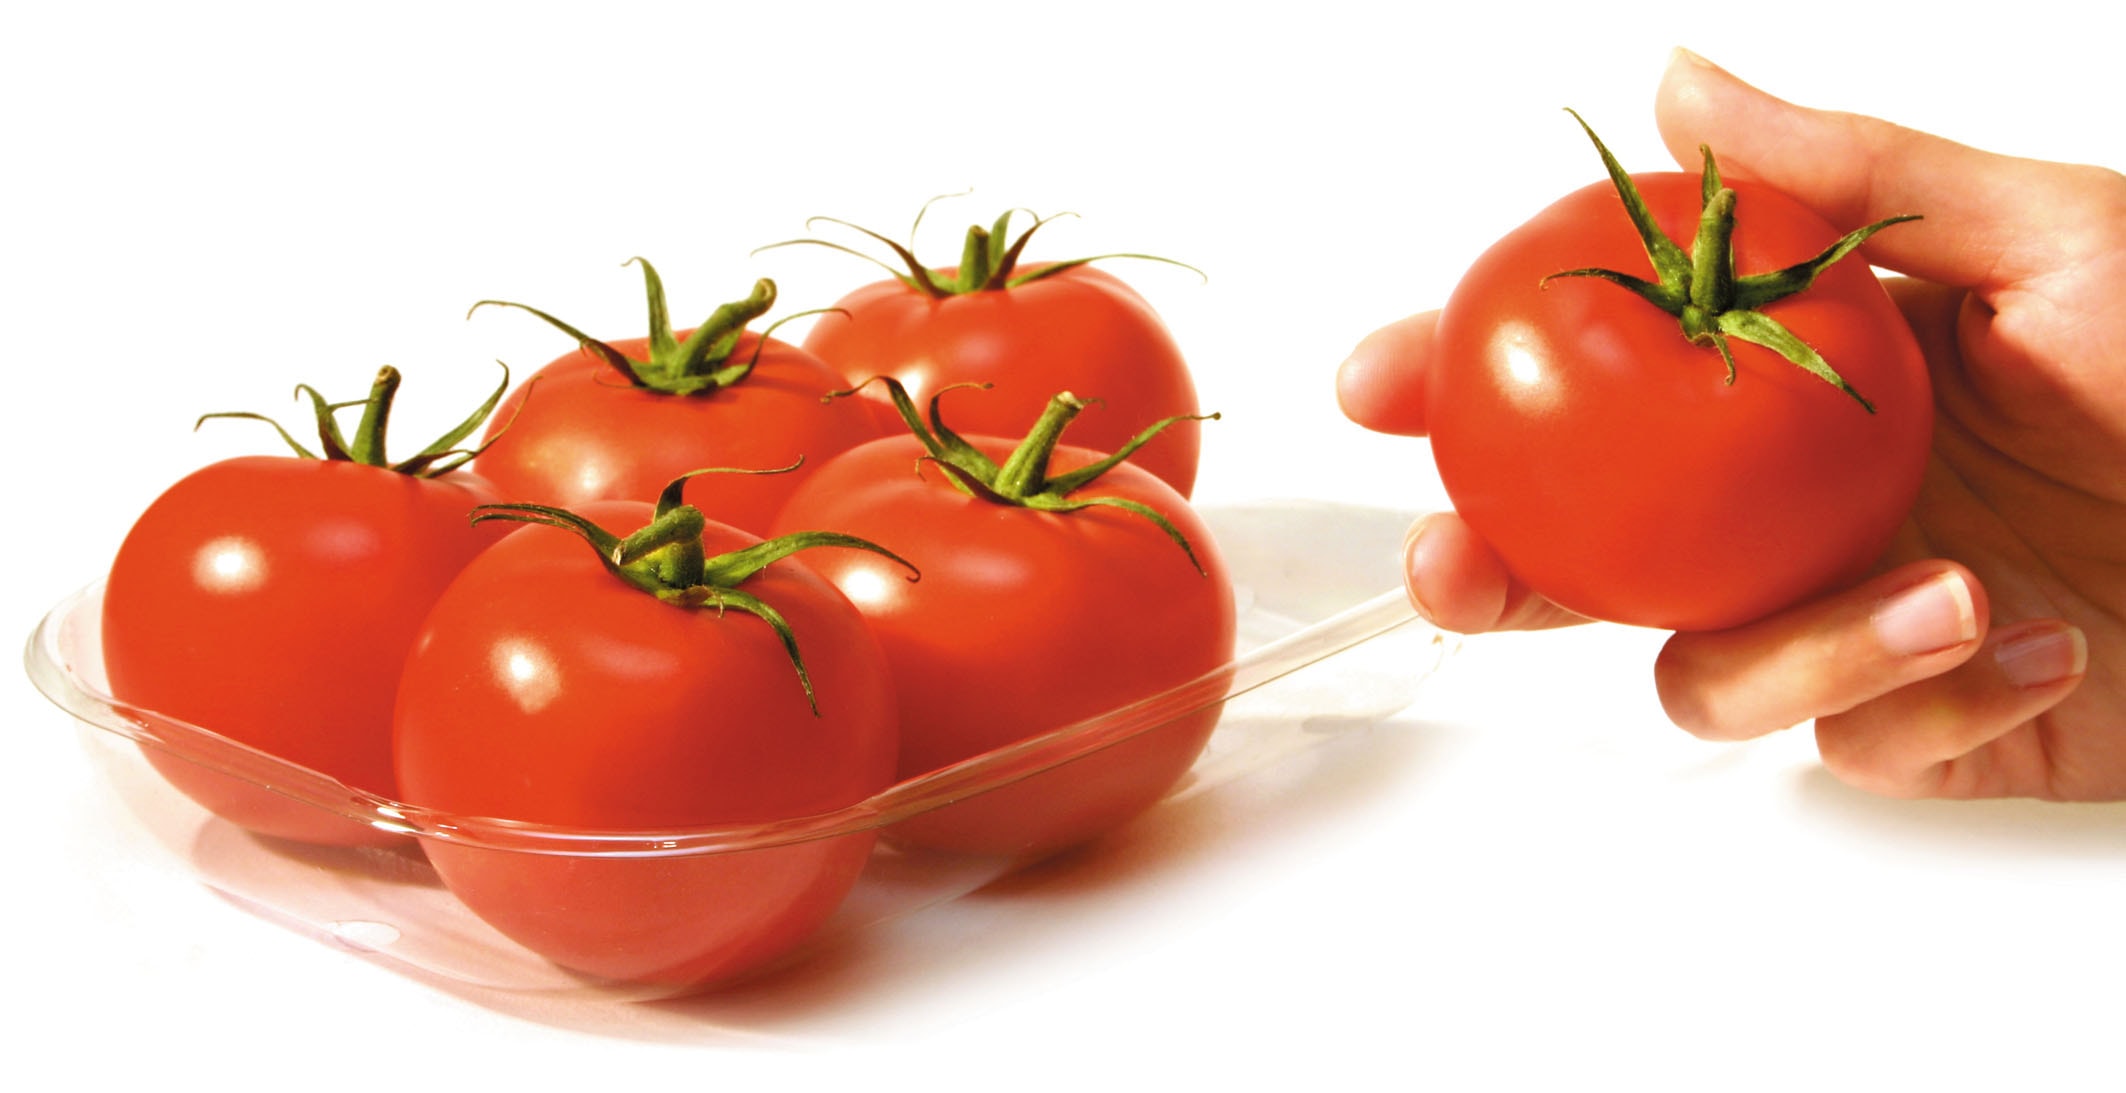 Why you should eat tomatoes